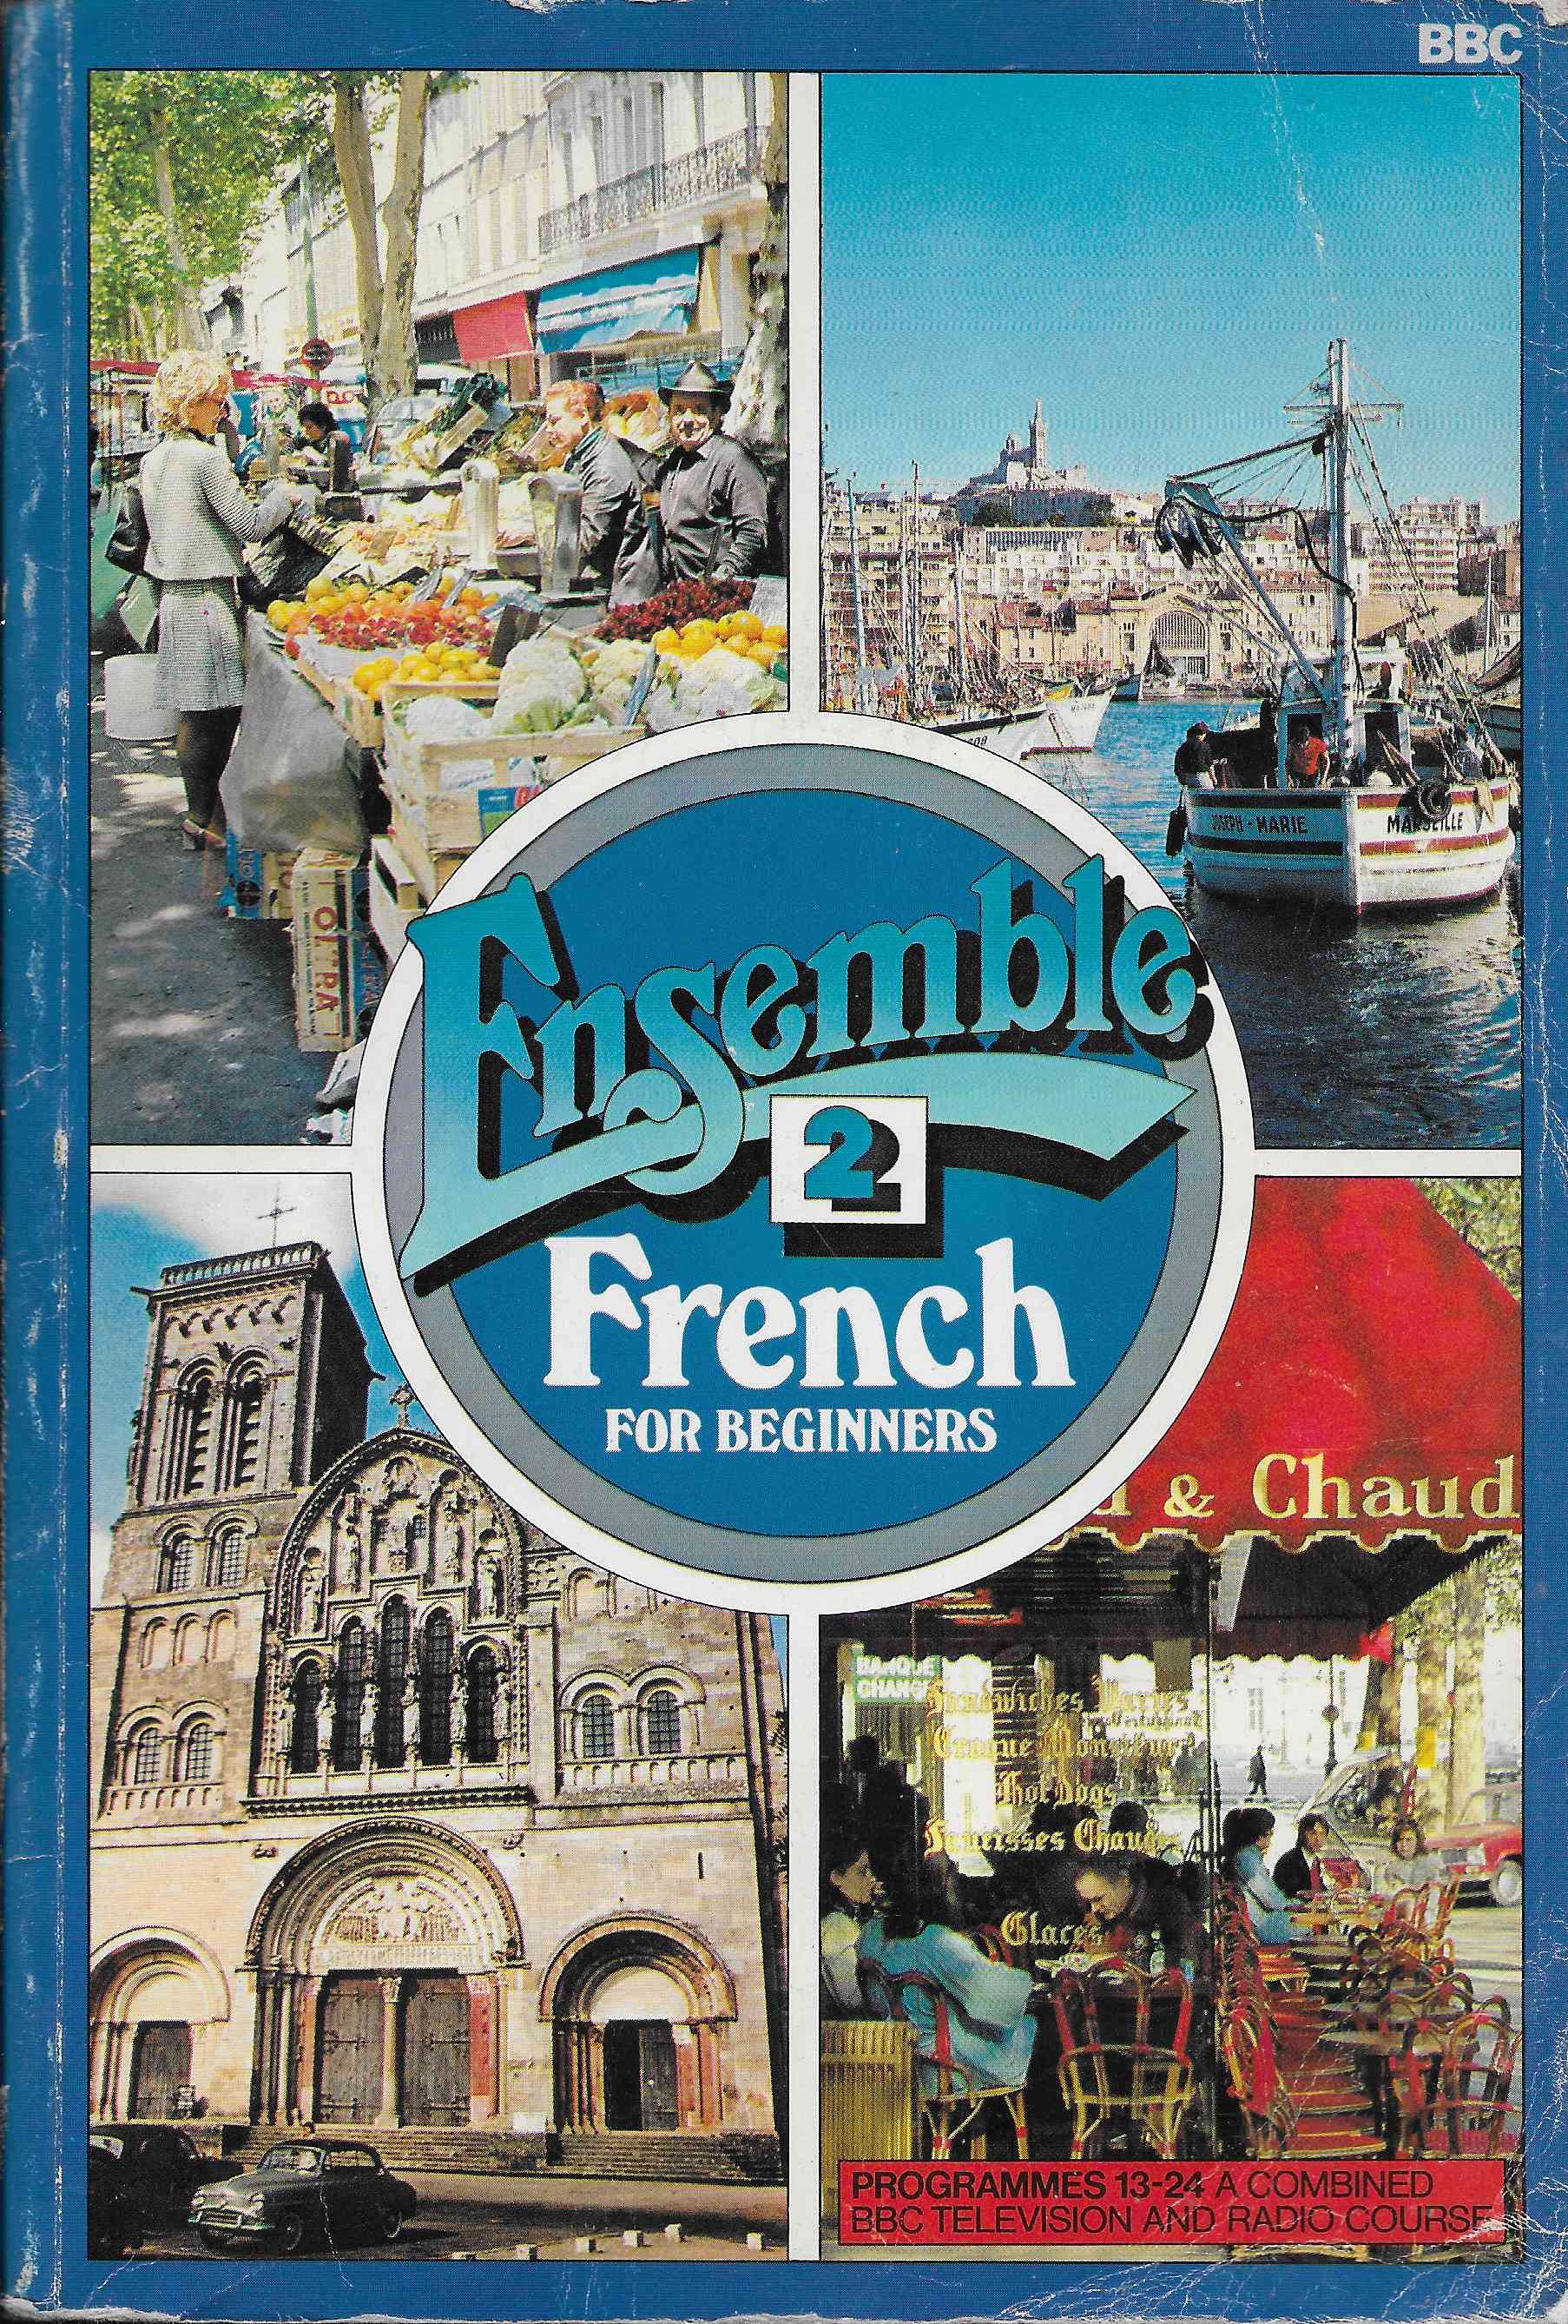 Picture of ISBN 0 563 10977 7 Ensemble 2 - French for beginners - Programmes 13 - 24 by artist Various from the BBC books - Records and Tapes library